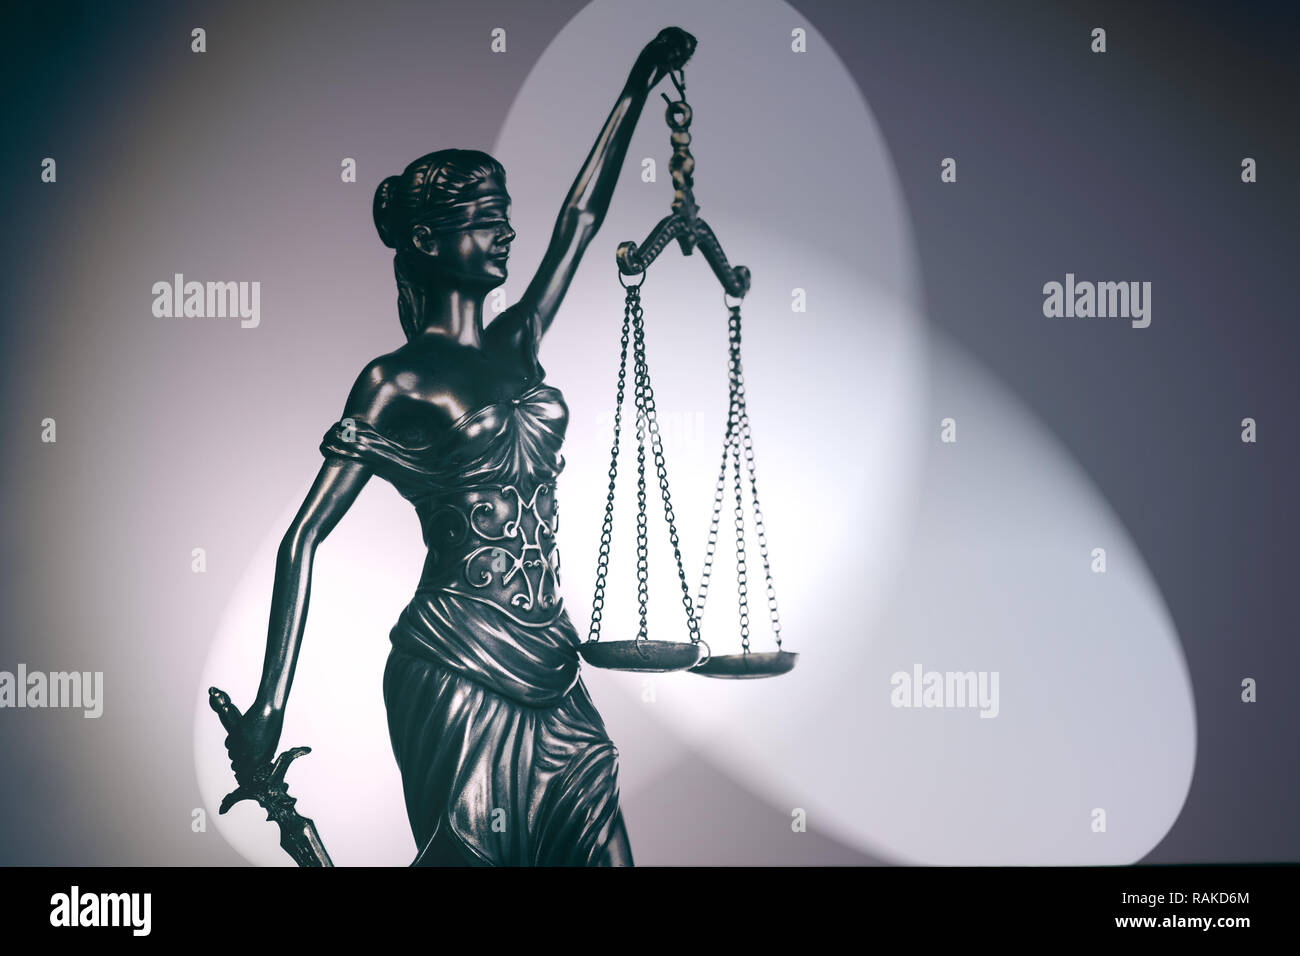 Legal law social justice concept image Stock Photo